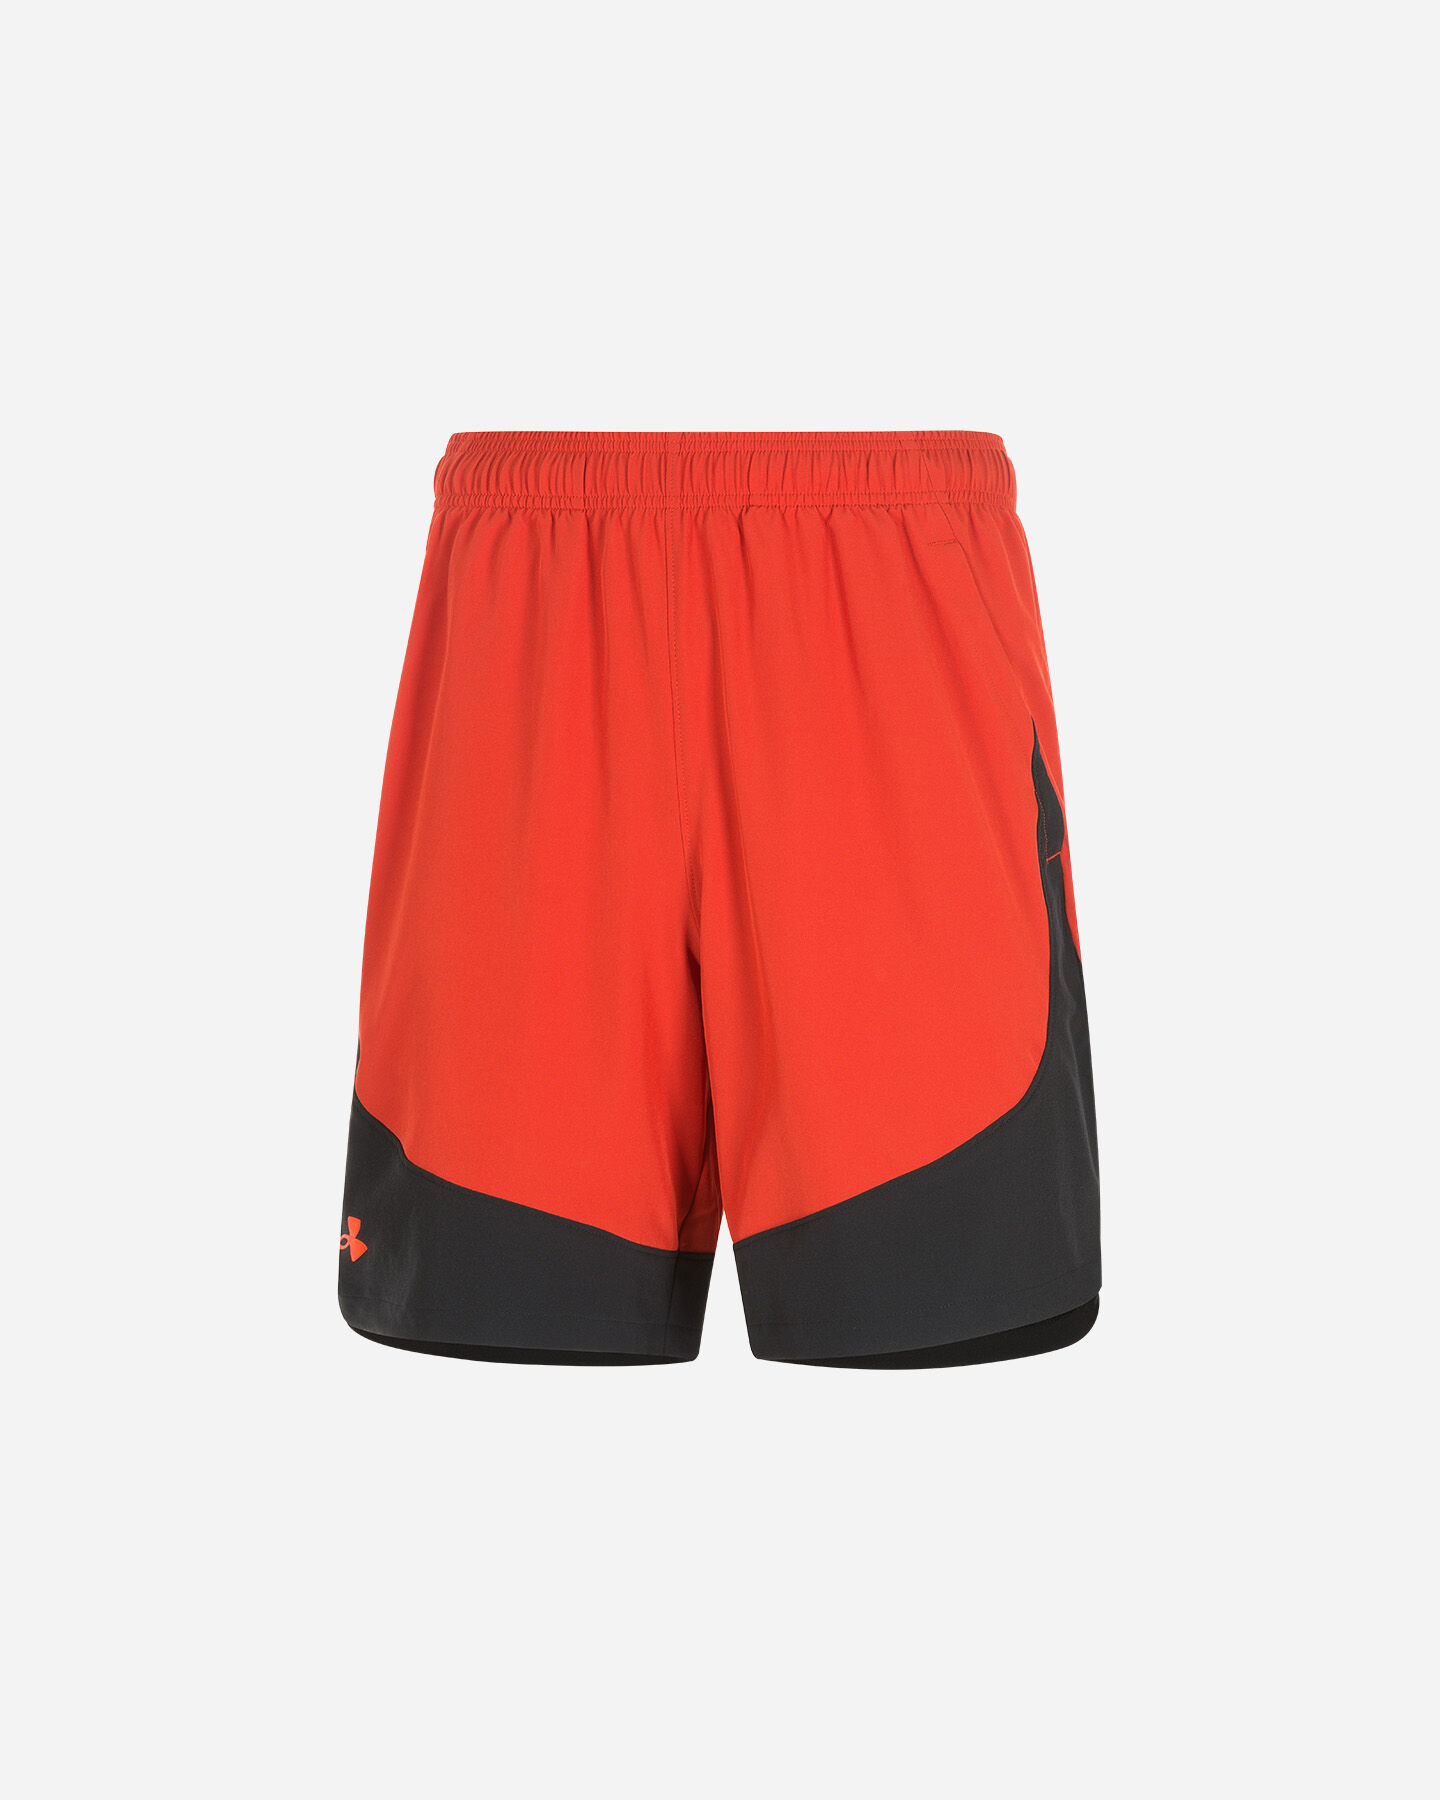  Pantalone training UNDER ARMOUR HIIT WOVEN COLOR BLOCK  M S5336530|0839|SM scatto 0